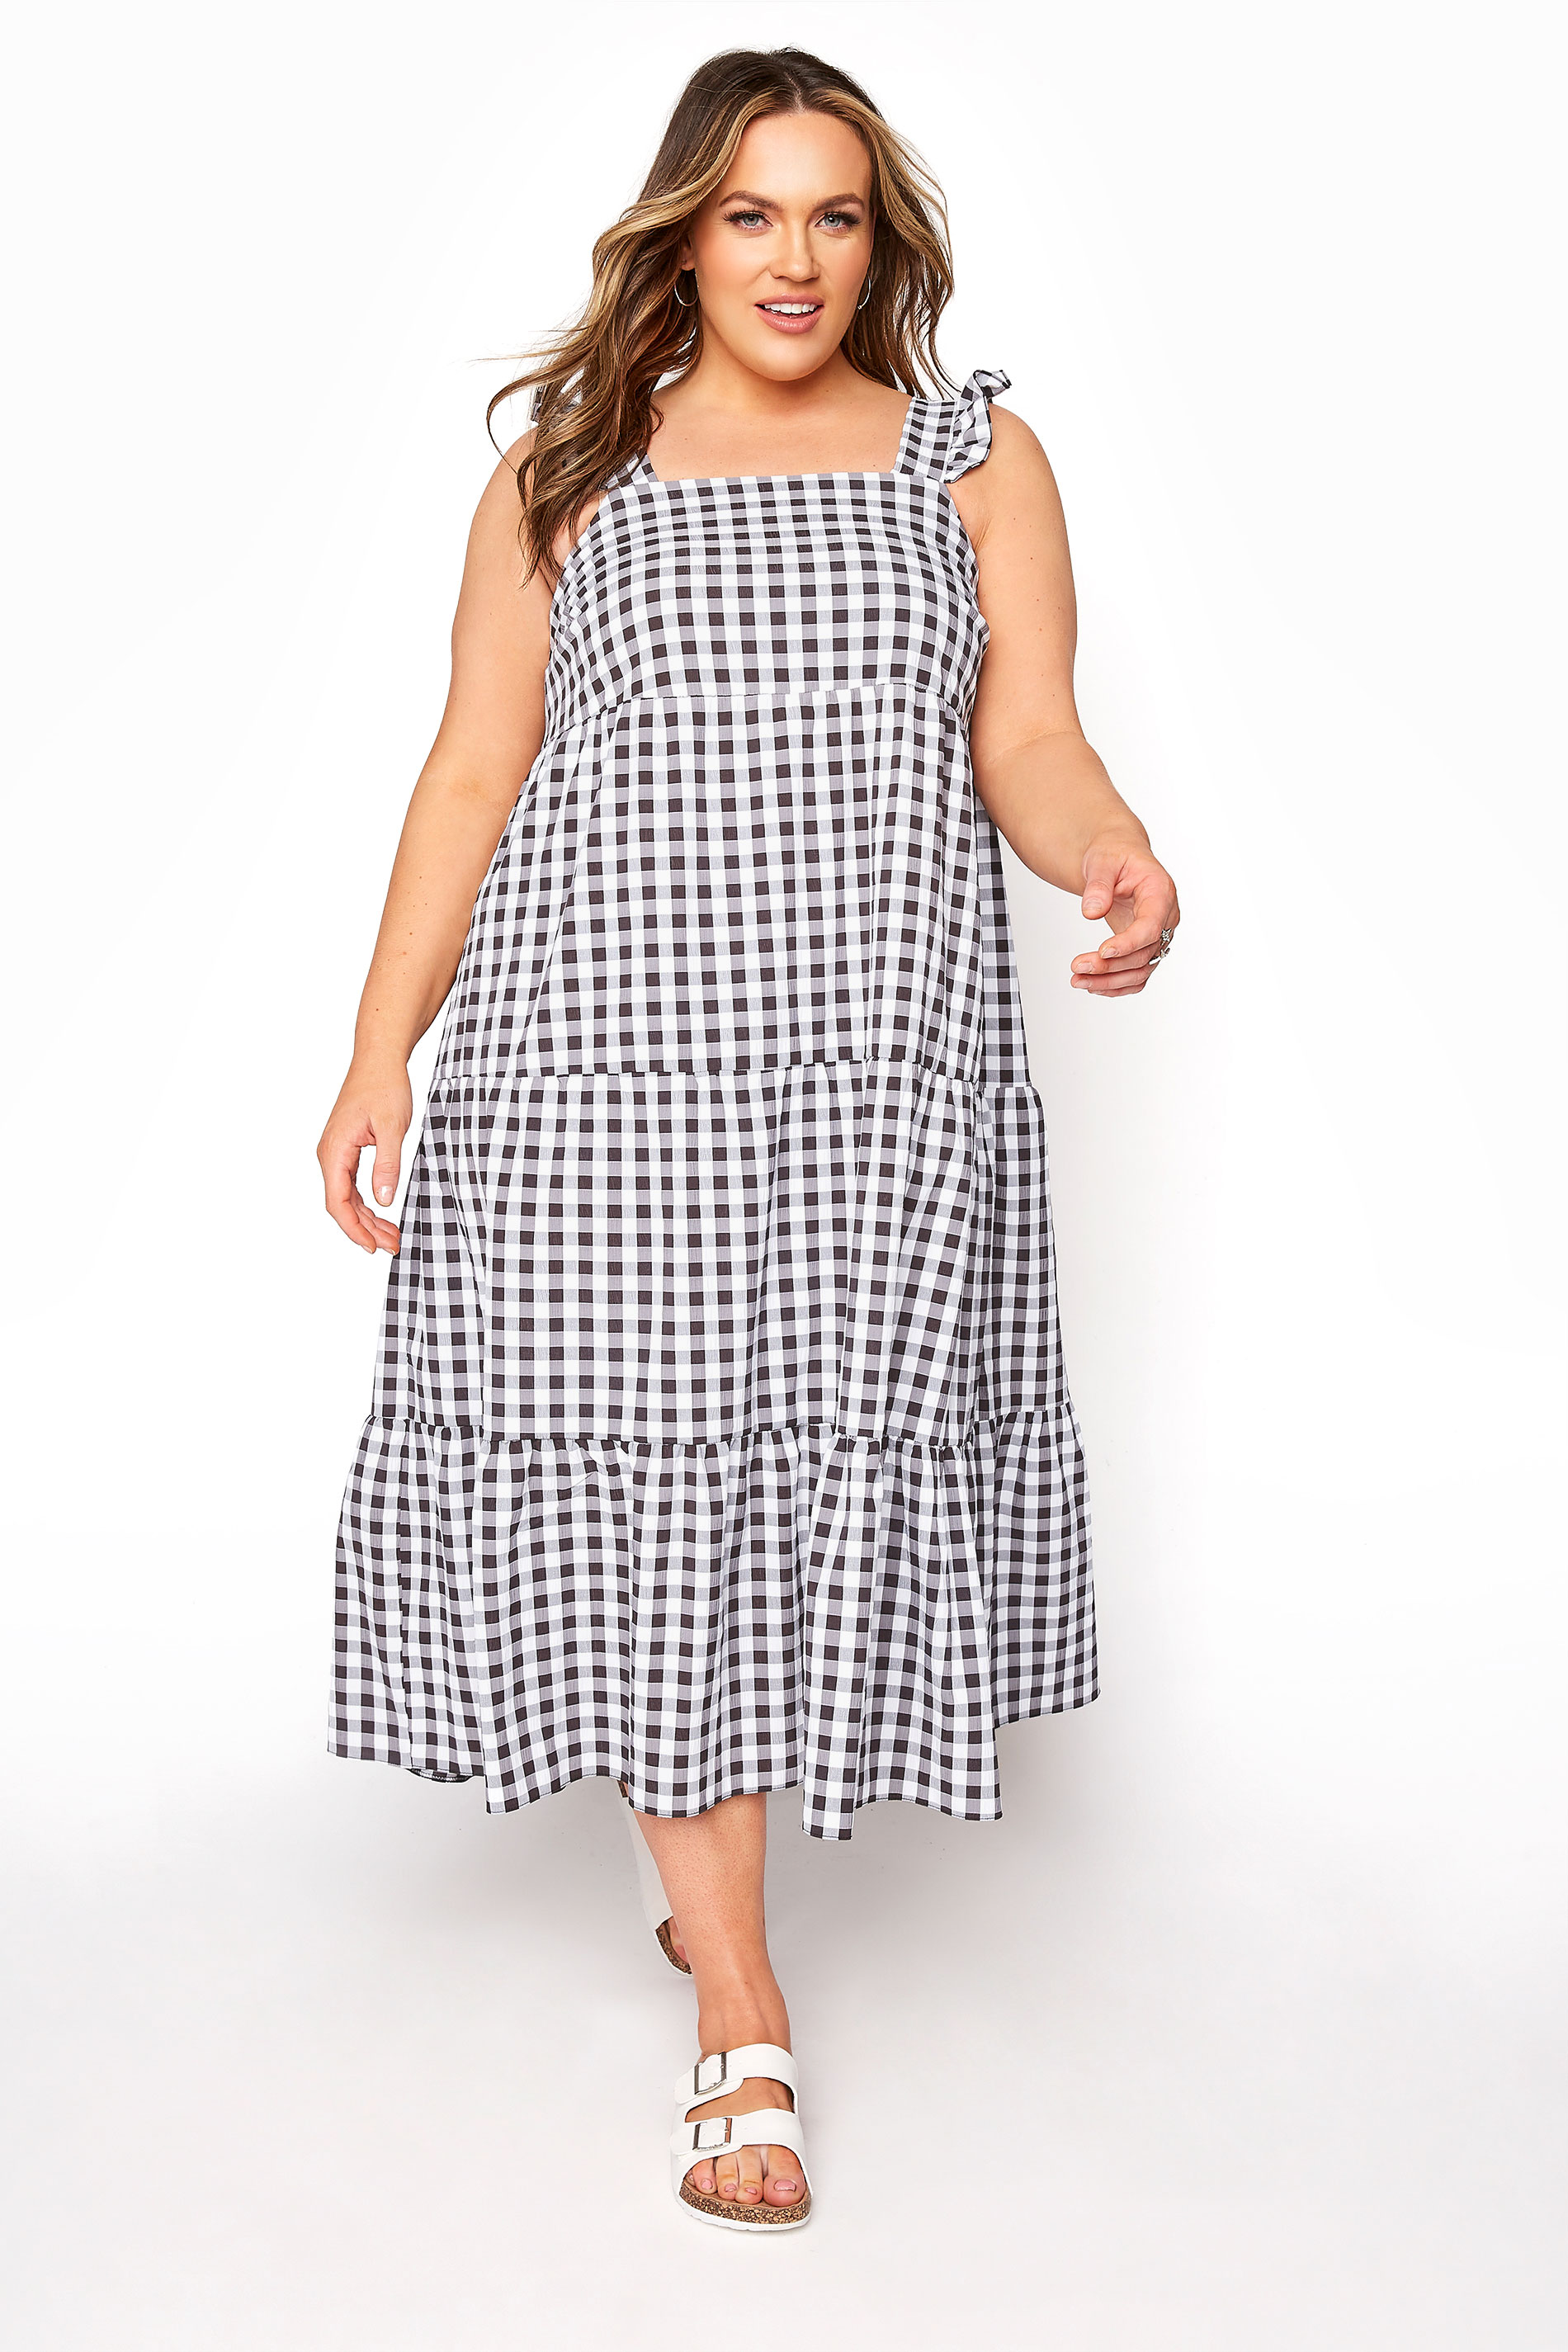 YOURS LONDON Curve Black Gingham Frill Dress_A.jpg